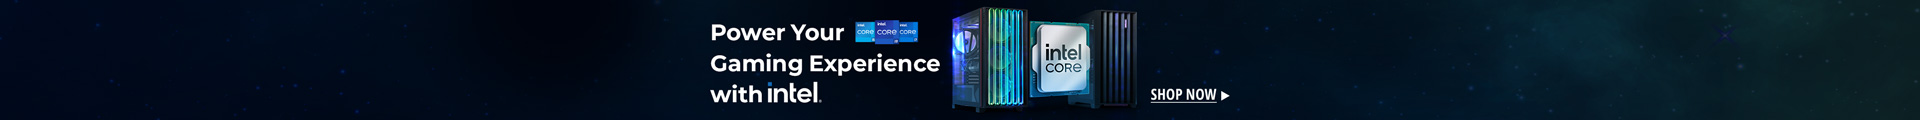 Power your Gaming Experience with intel